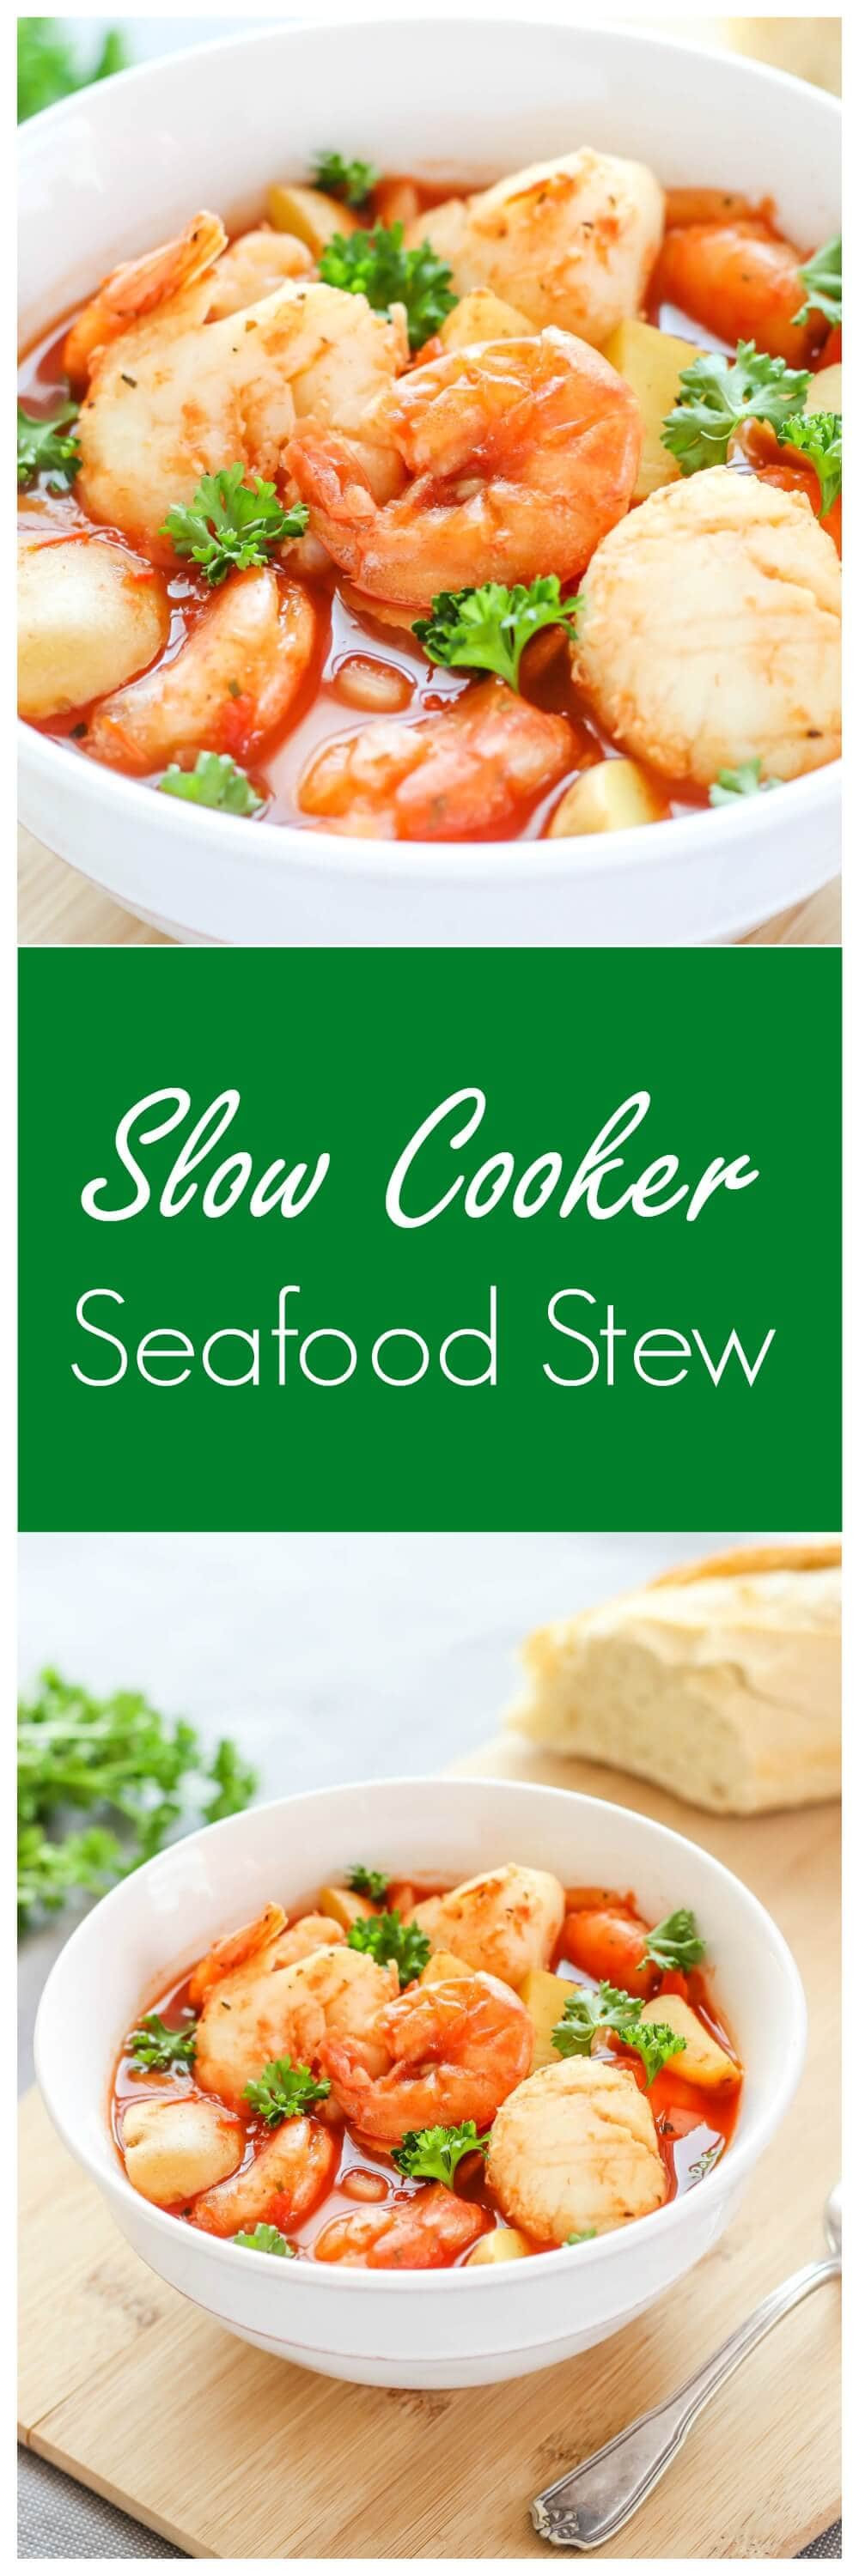 Fish Slow Cooker Recipes Healthy
 healthy slow cooker fish recipes